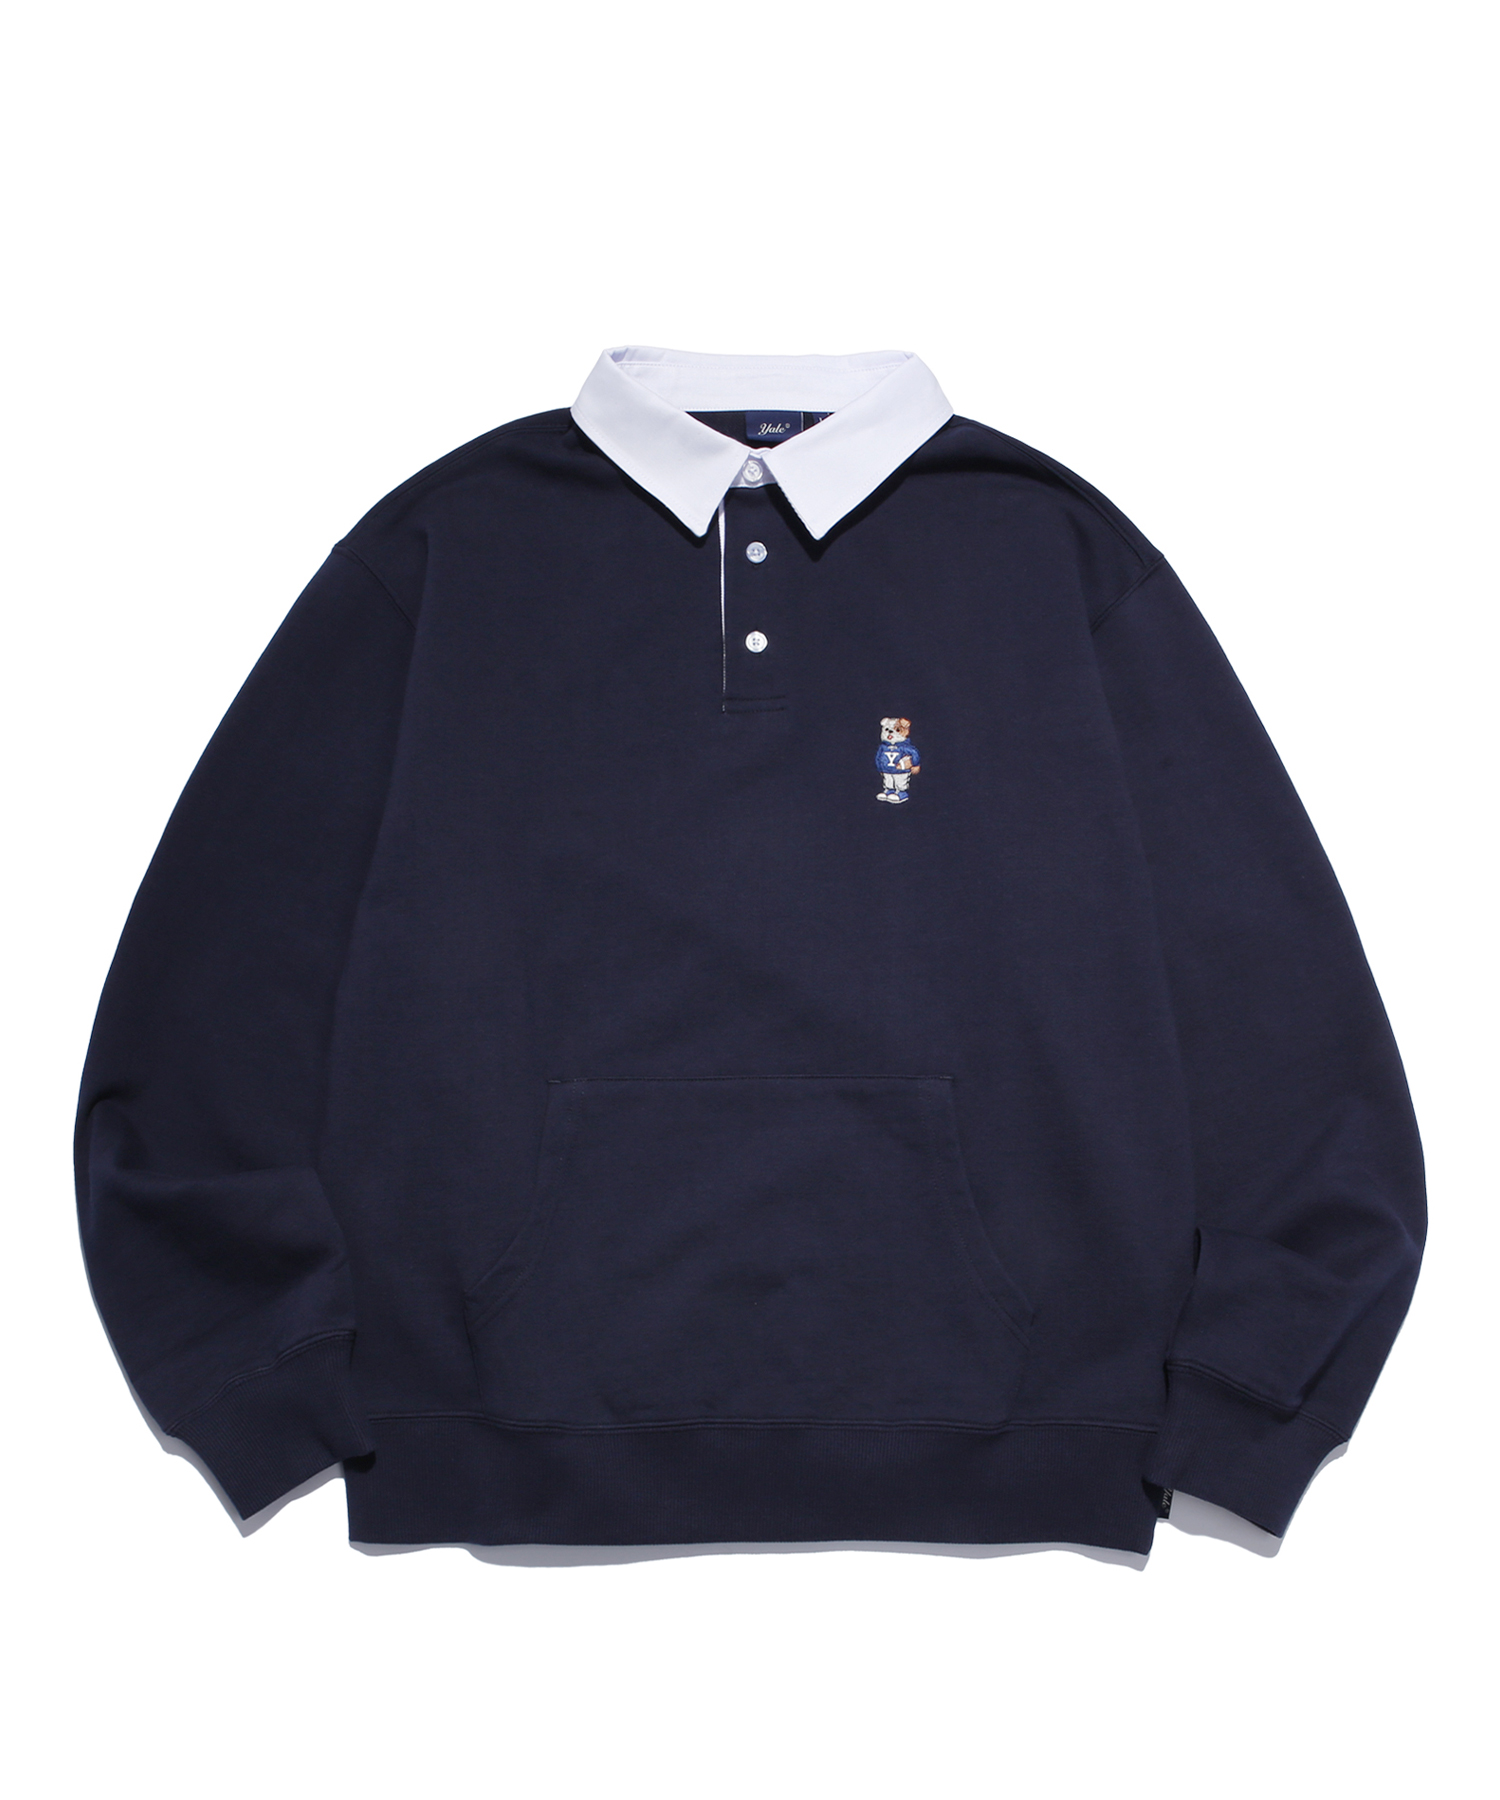 EMBROIDERY UNIVERSITY DAN RUGBY CREWNECK NAVY